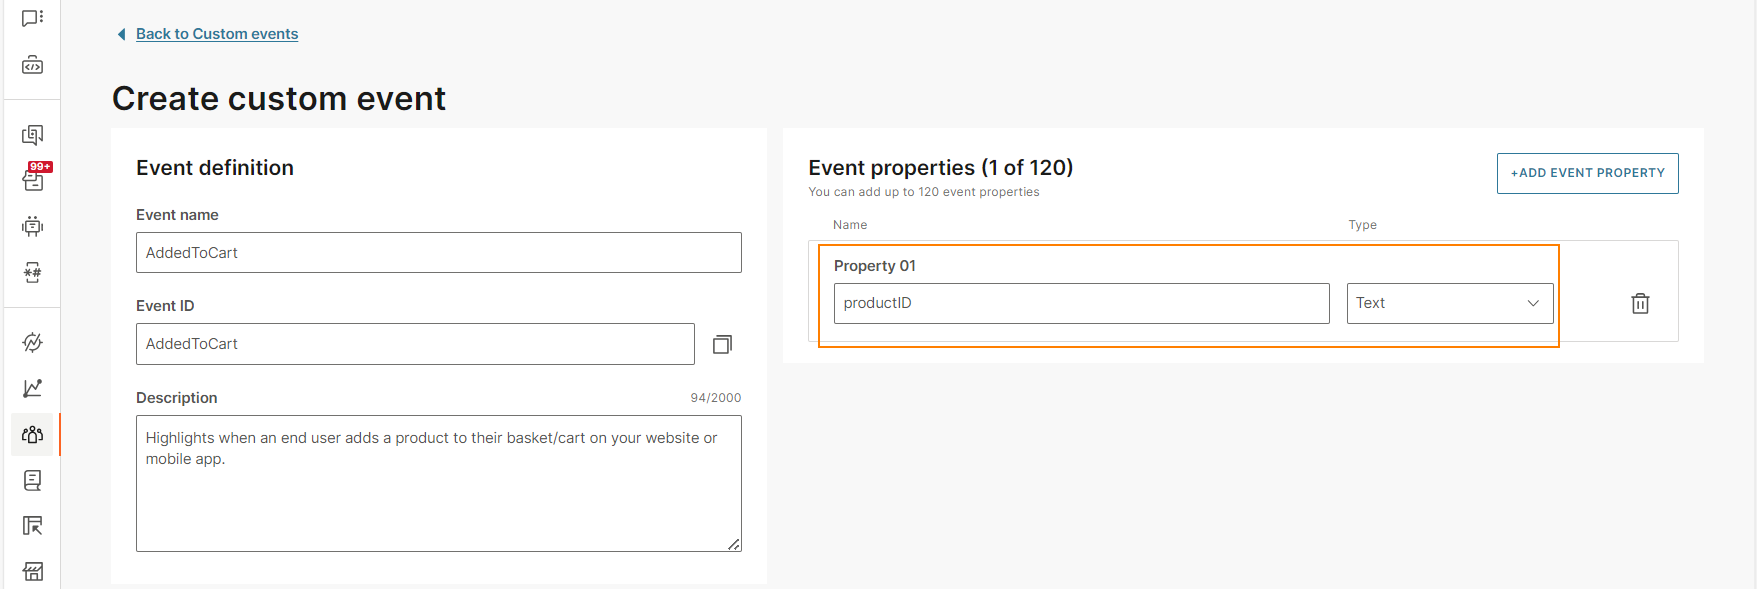 Create properties for the event